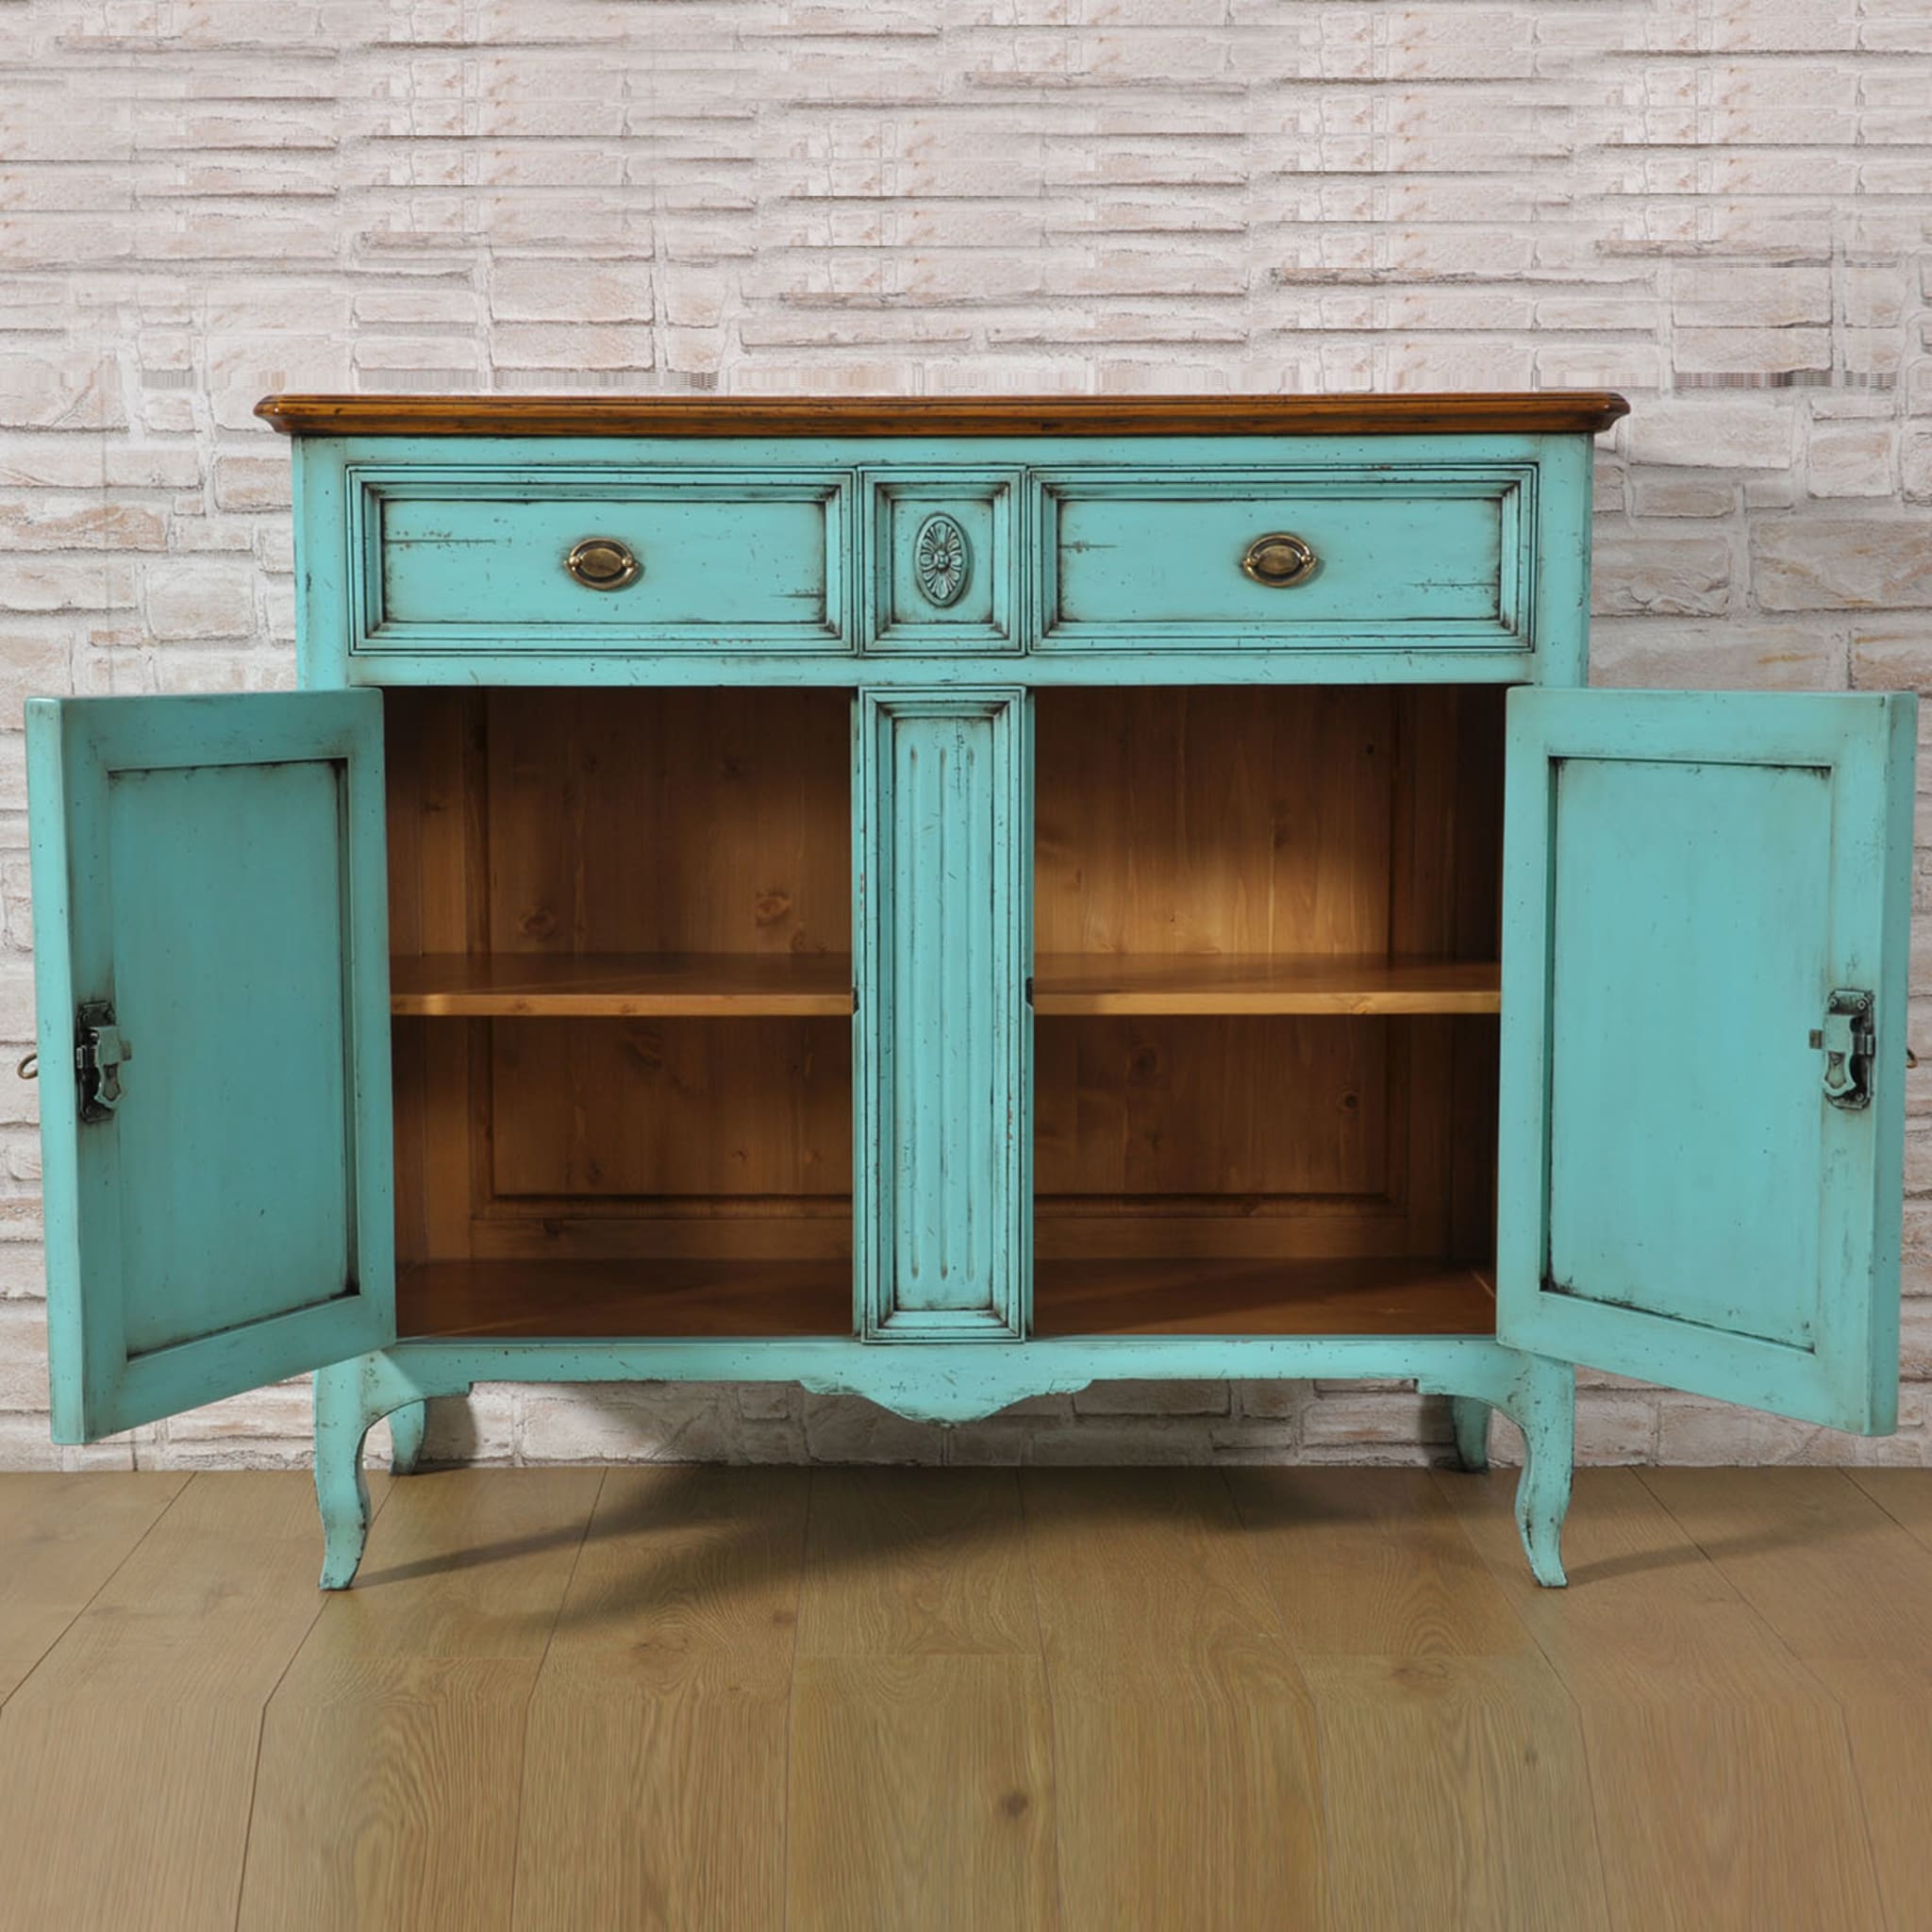 Impero '800 Empire-Style Turquoise Sideboard - Alternative view 1